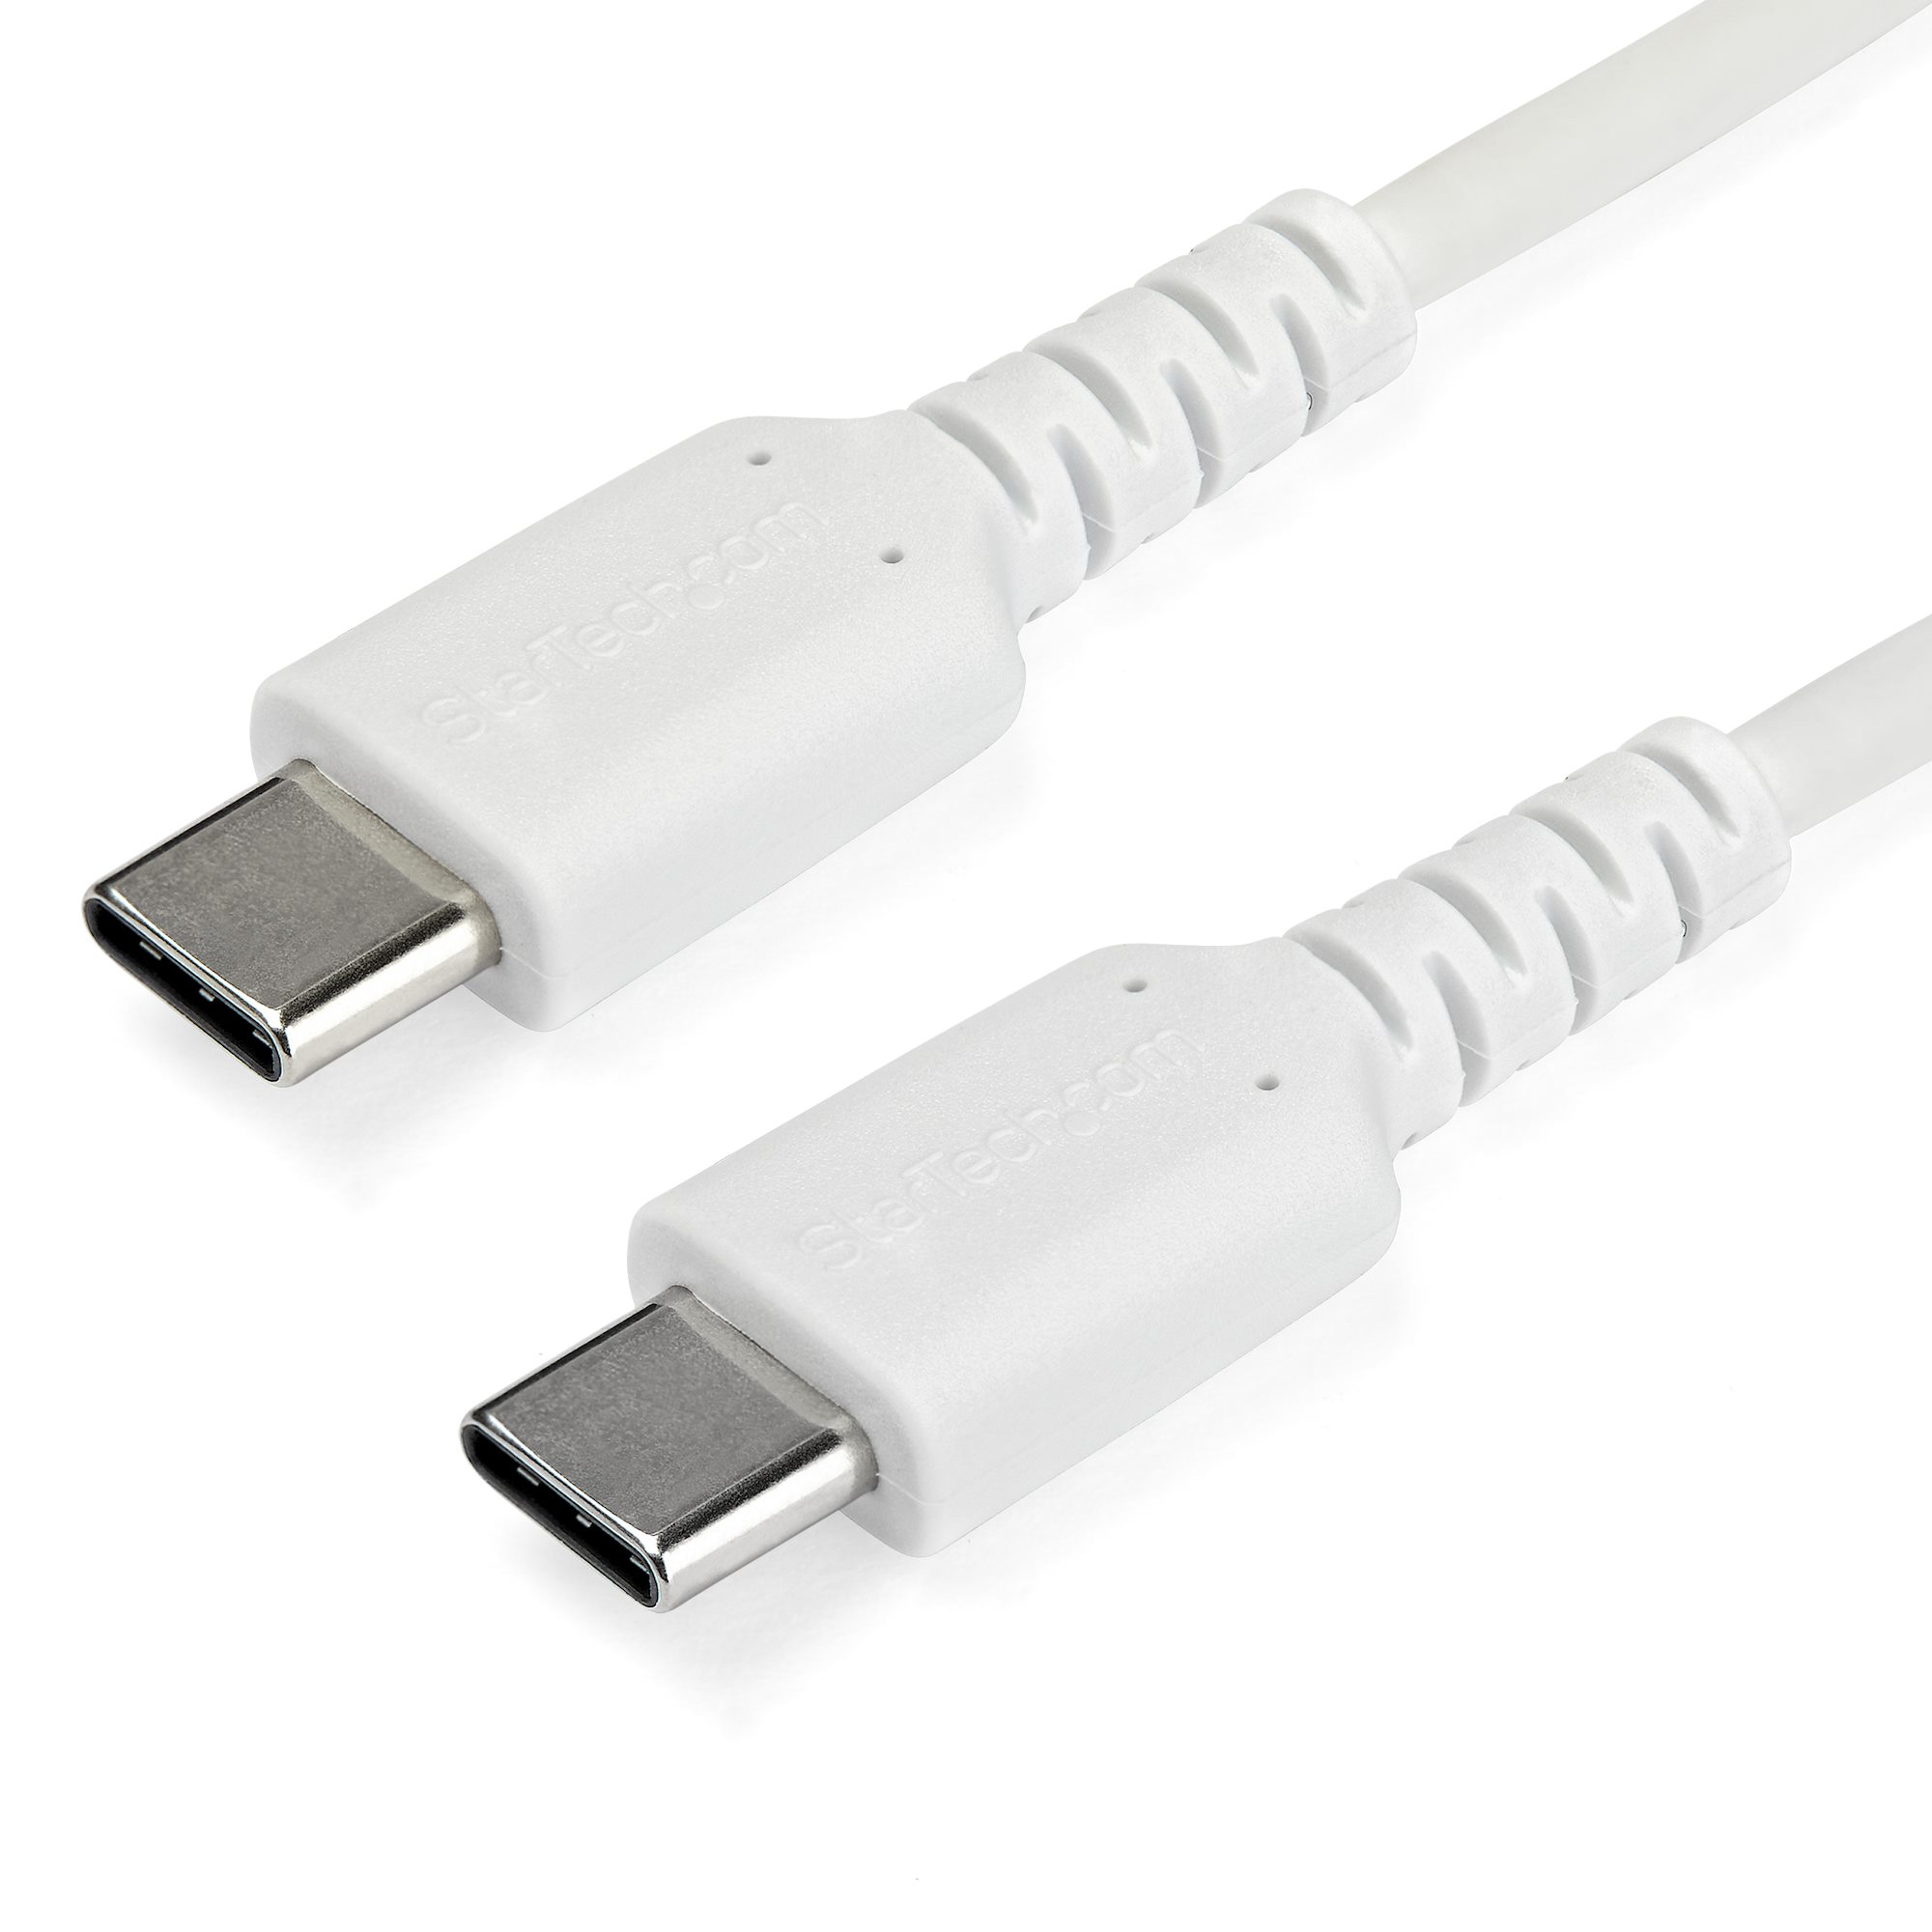 Product  StarTech.com 3 ft 1m USB to USB C Cable - USB 3.1 10Gpbs - USB-IF  Certified (USB31AC1M) - USB-C cable - 24 pin USB-C to USB Type A - 1 m